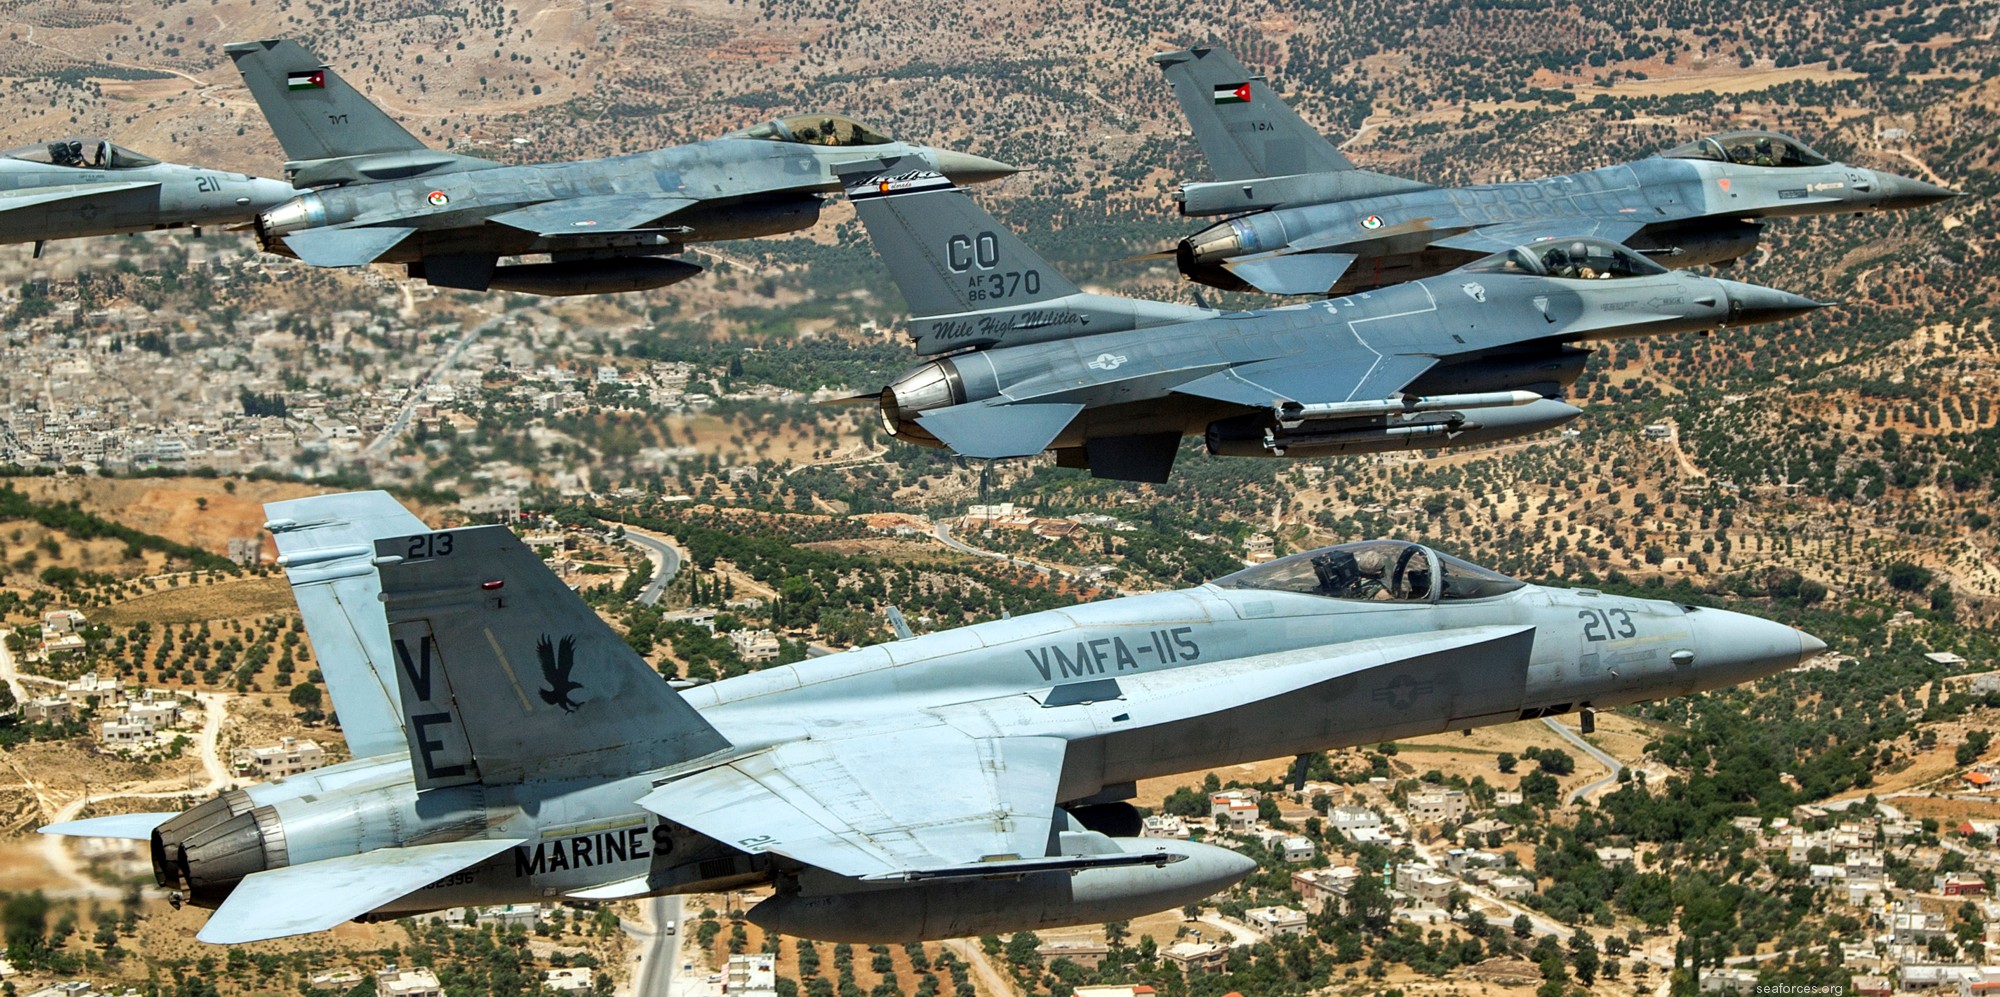 vmfa-115 silver eagles marine fighter attack squadron f/a-18a+ hornet 81 exercise eager lion jordan